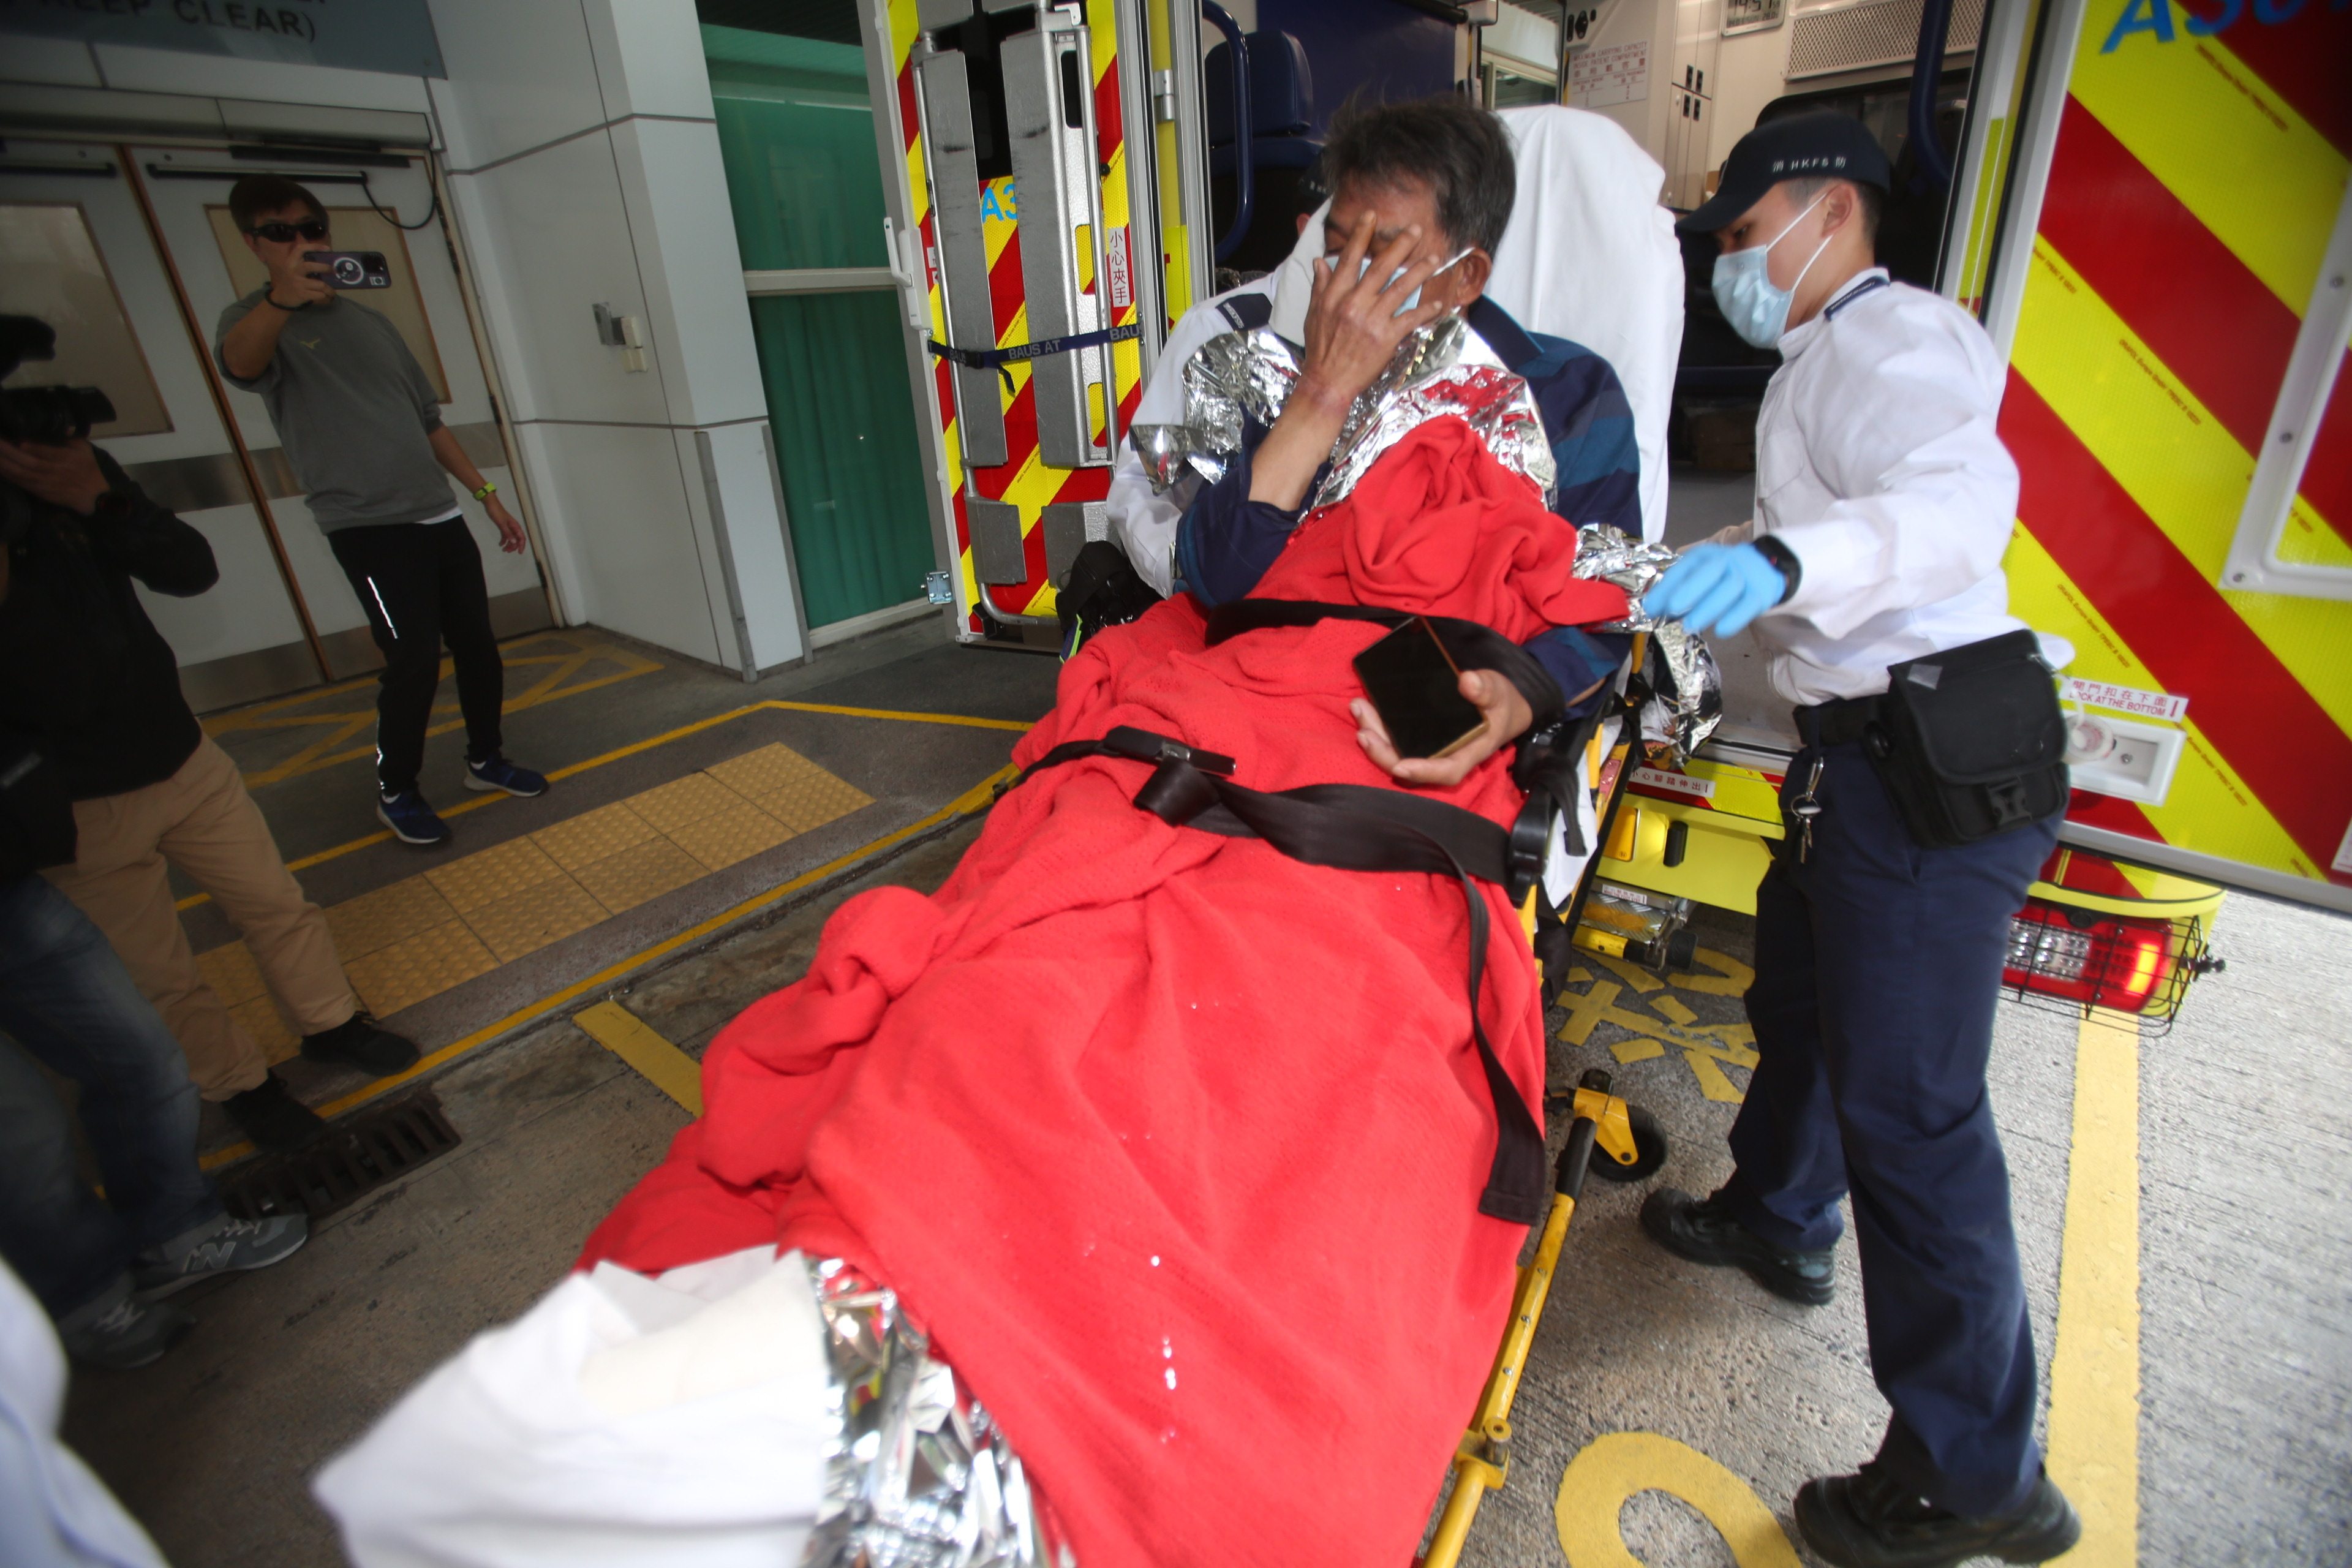 The brother who survived is taken to Pamela Youde Nethersole Eastern Hospital in Chai Wan. Photo: Handout